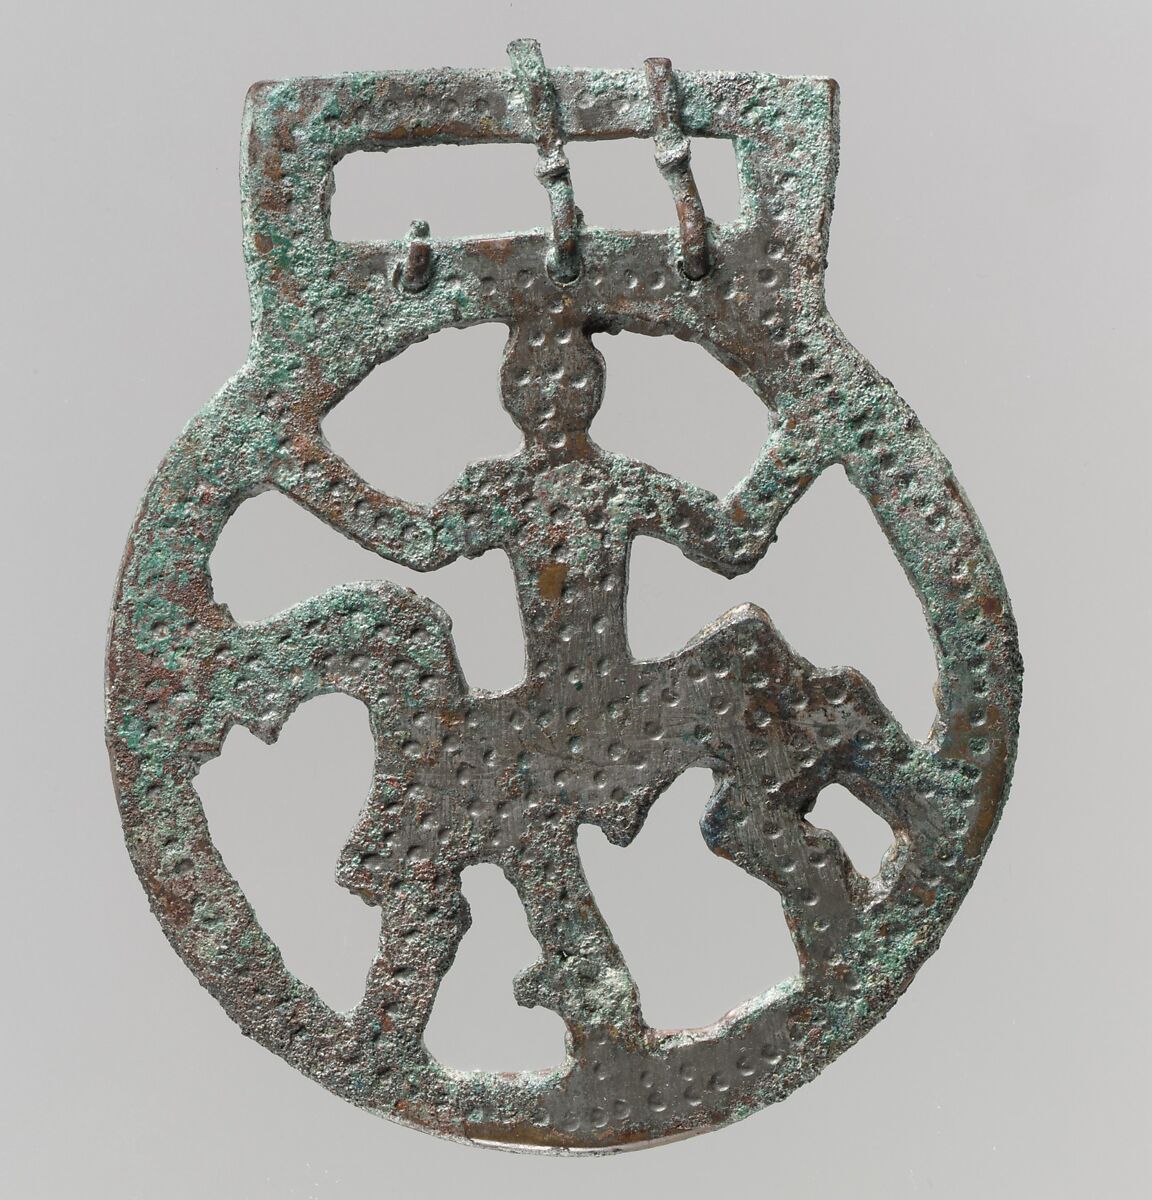 Openwork Belt Fitting, Copper alloy, "tinned" surface, Frankish 